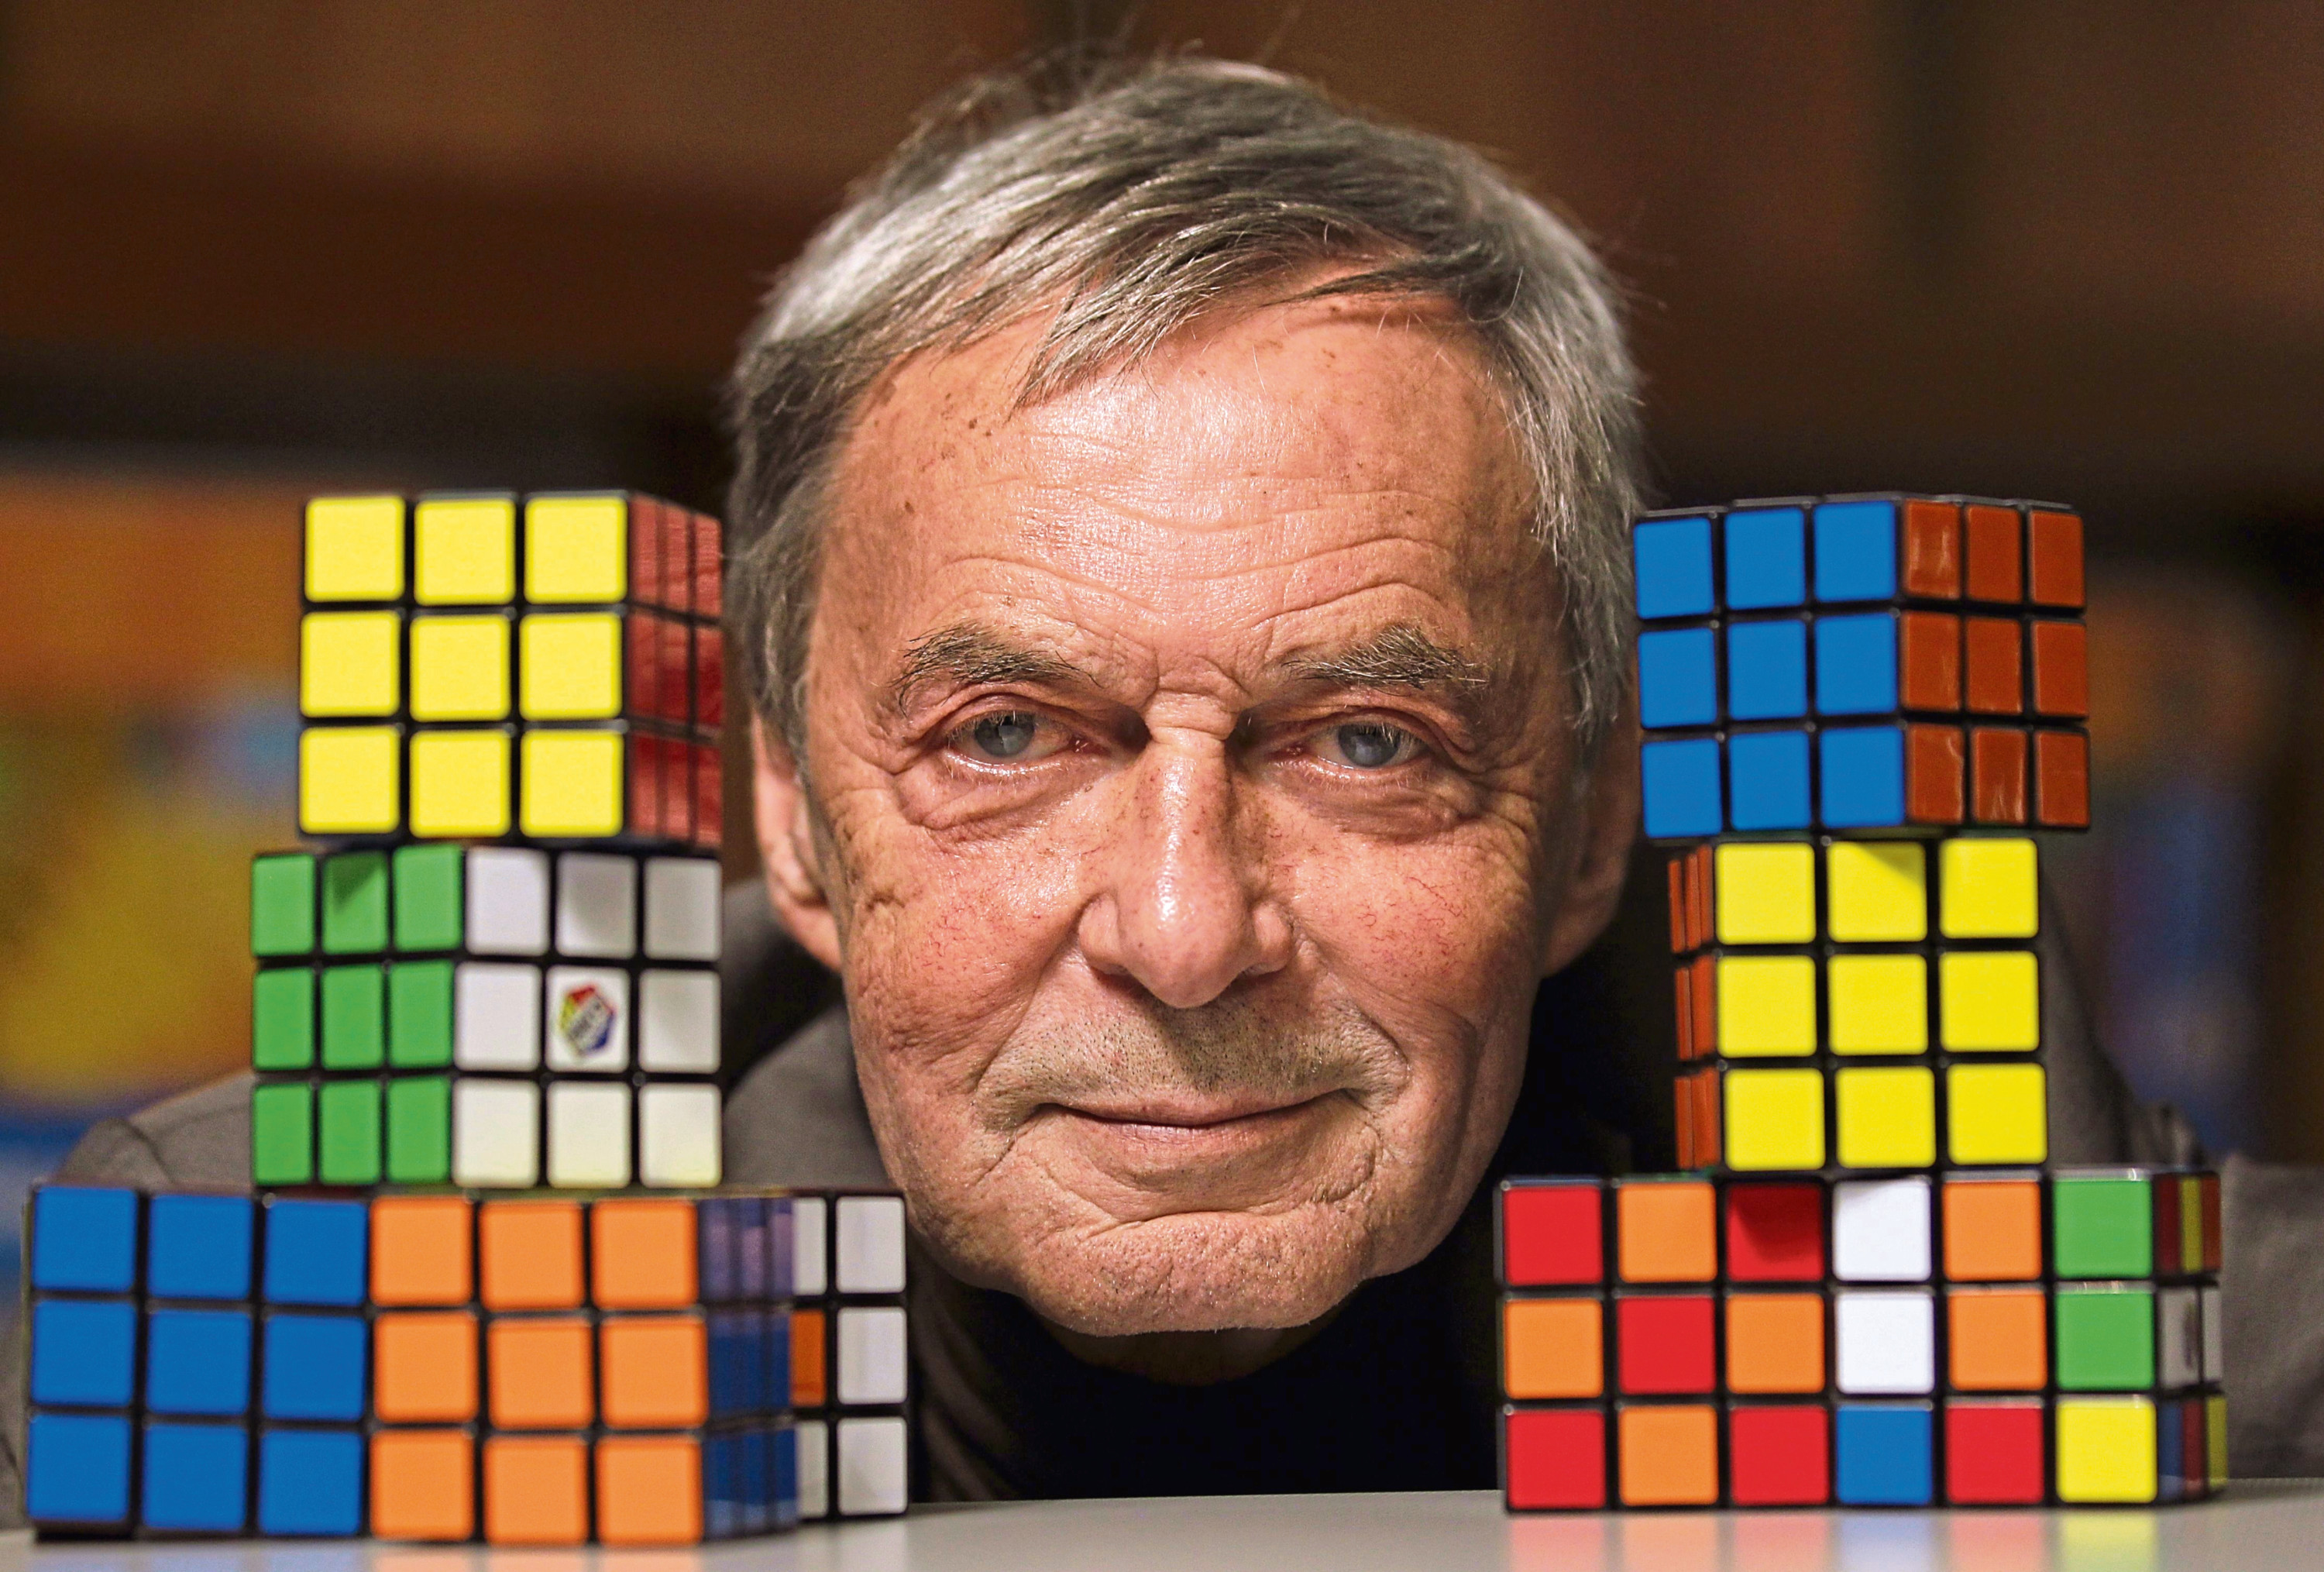 Erno Rubik with his famous invention